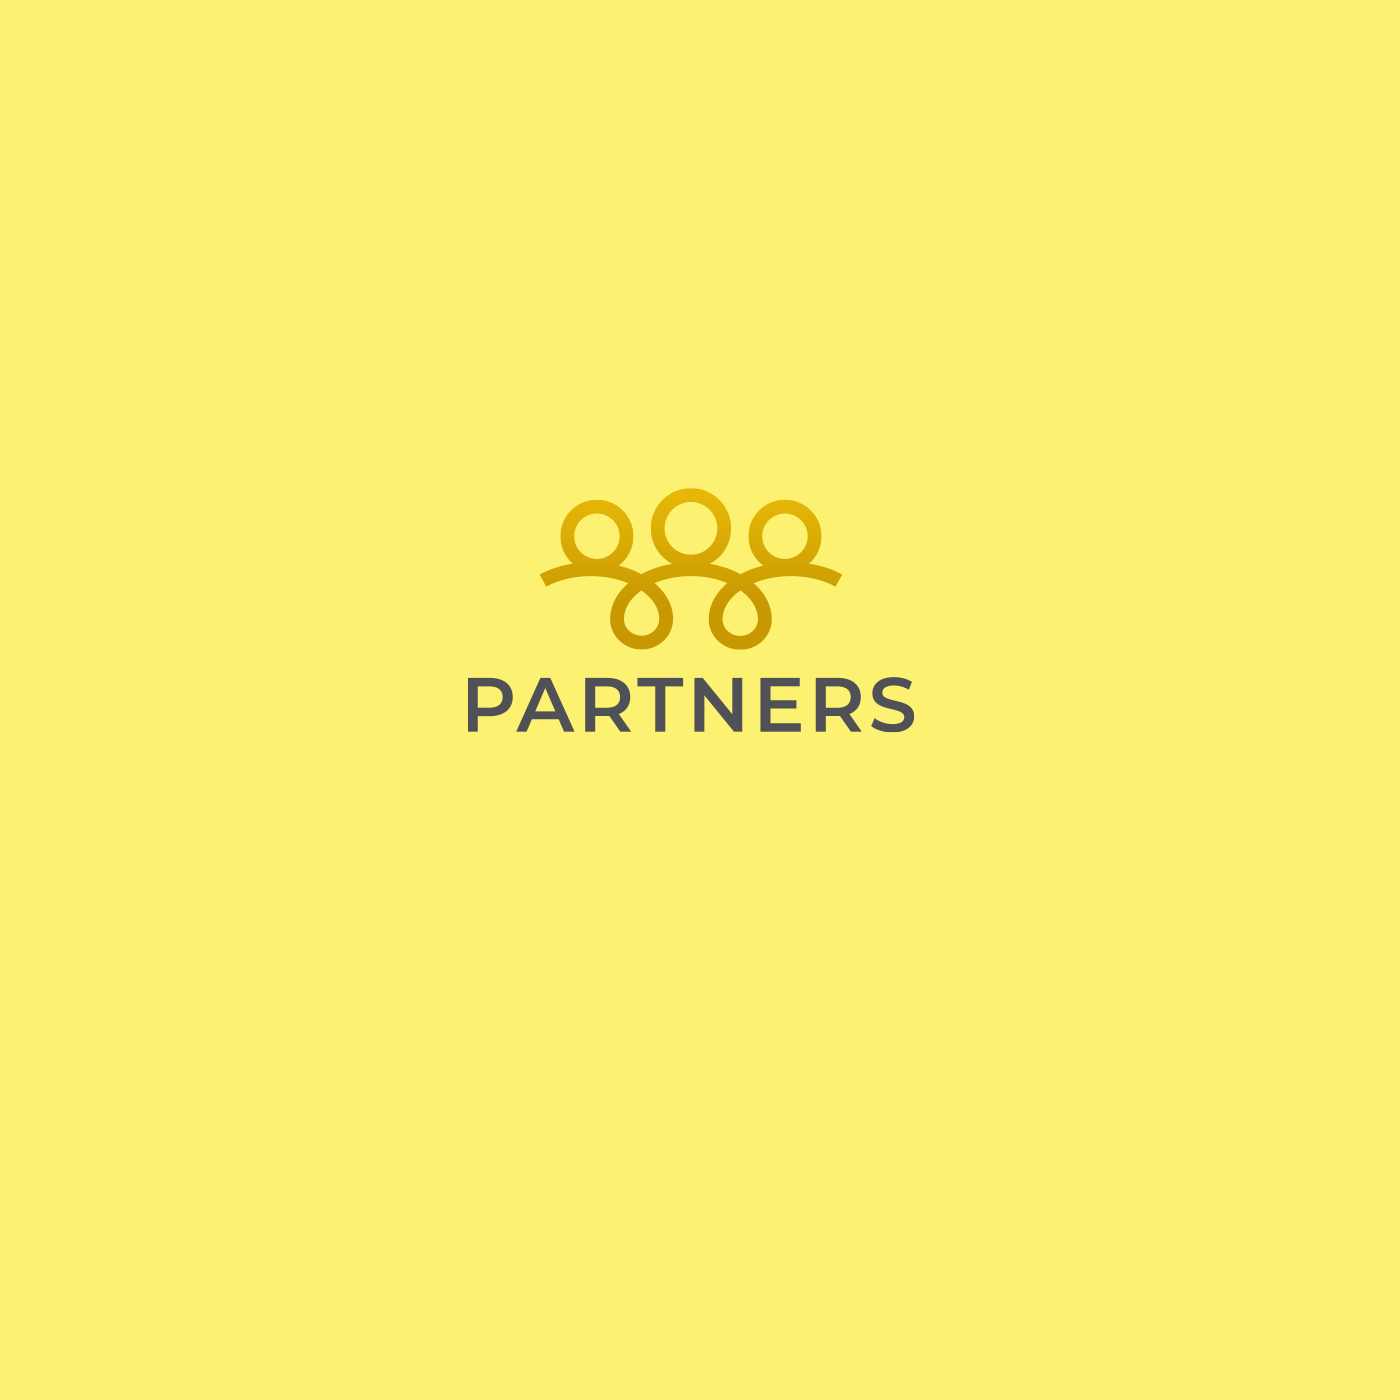 Partners Icon on a yellow background.